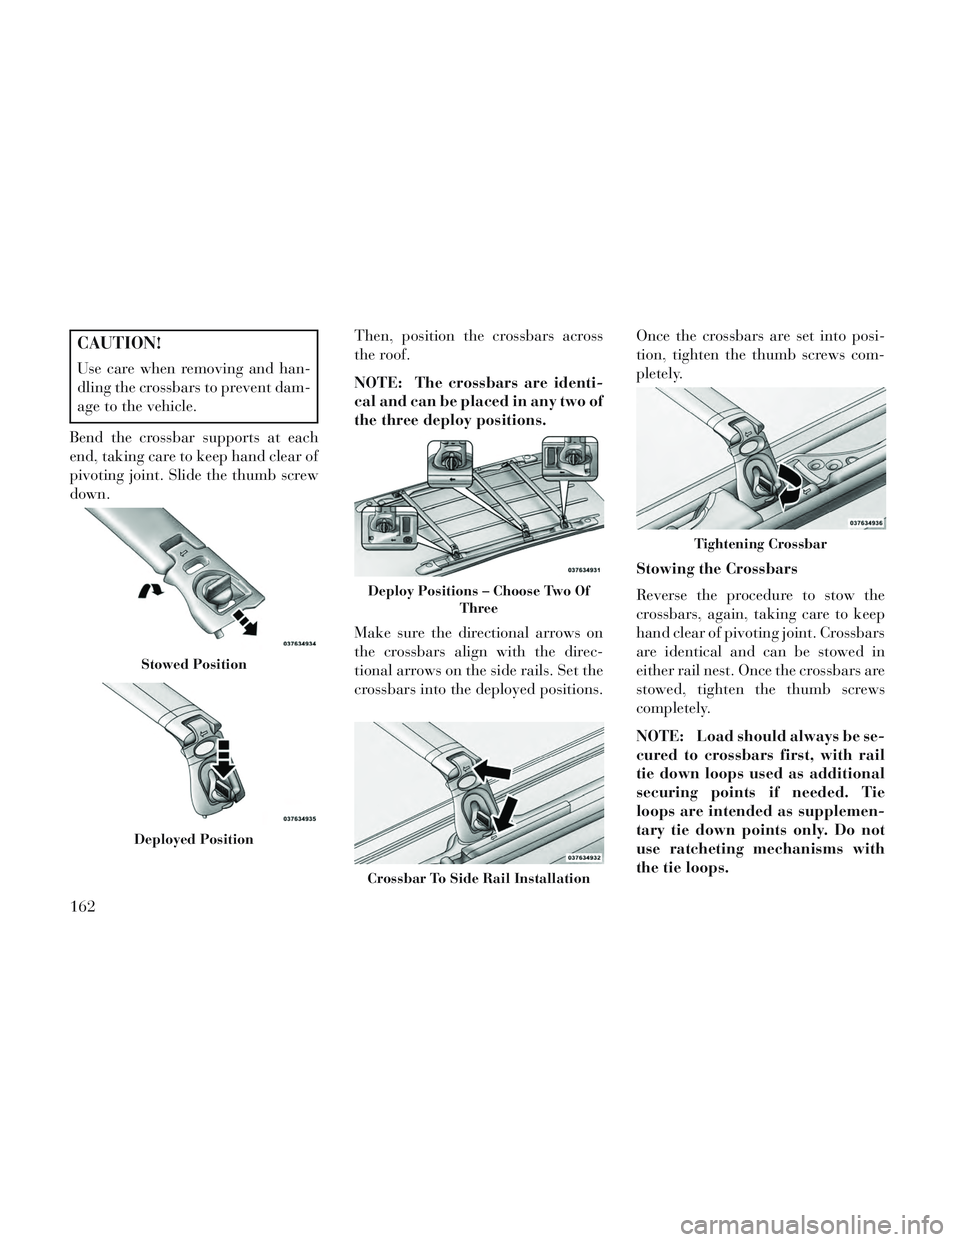 Lancia Voyager 2014  Owner handbook (in English) CAUTION!
Use care when removing and han-
dling the crossbars to prevent dam-
age to the vehicle.
Bend the crossbar supports at each
end, taking care to keep hand clear of
pivoting joint. Slide the thu